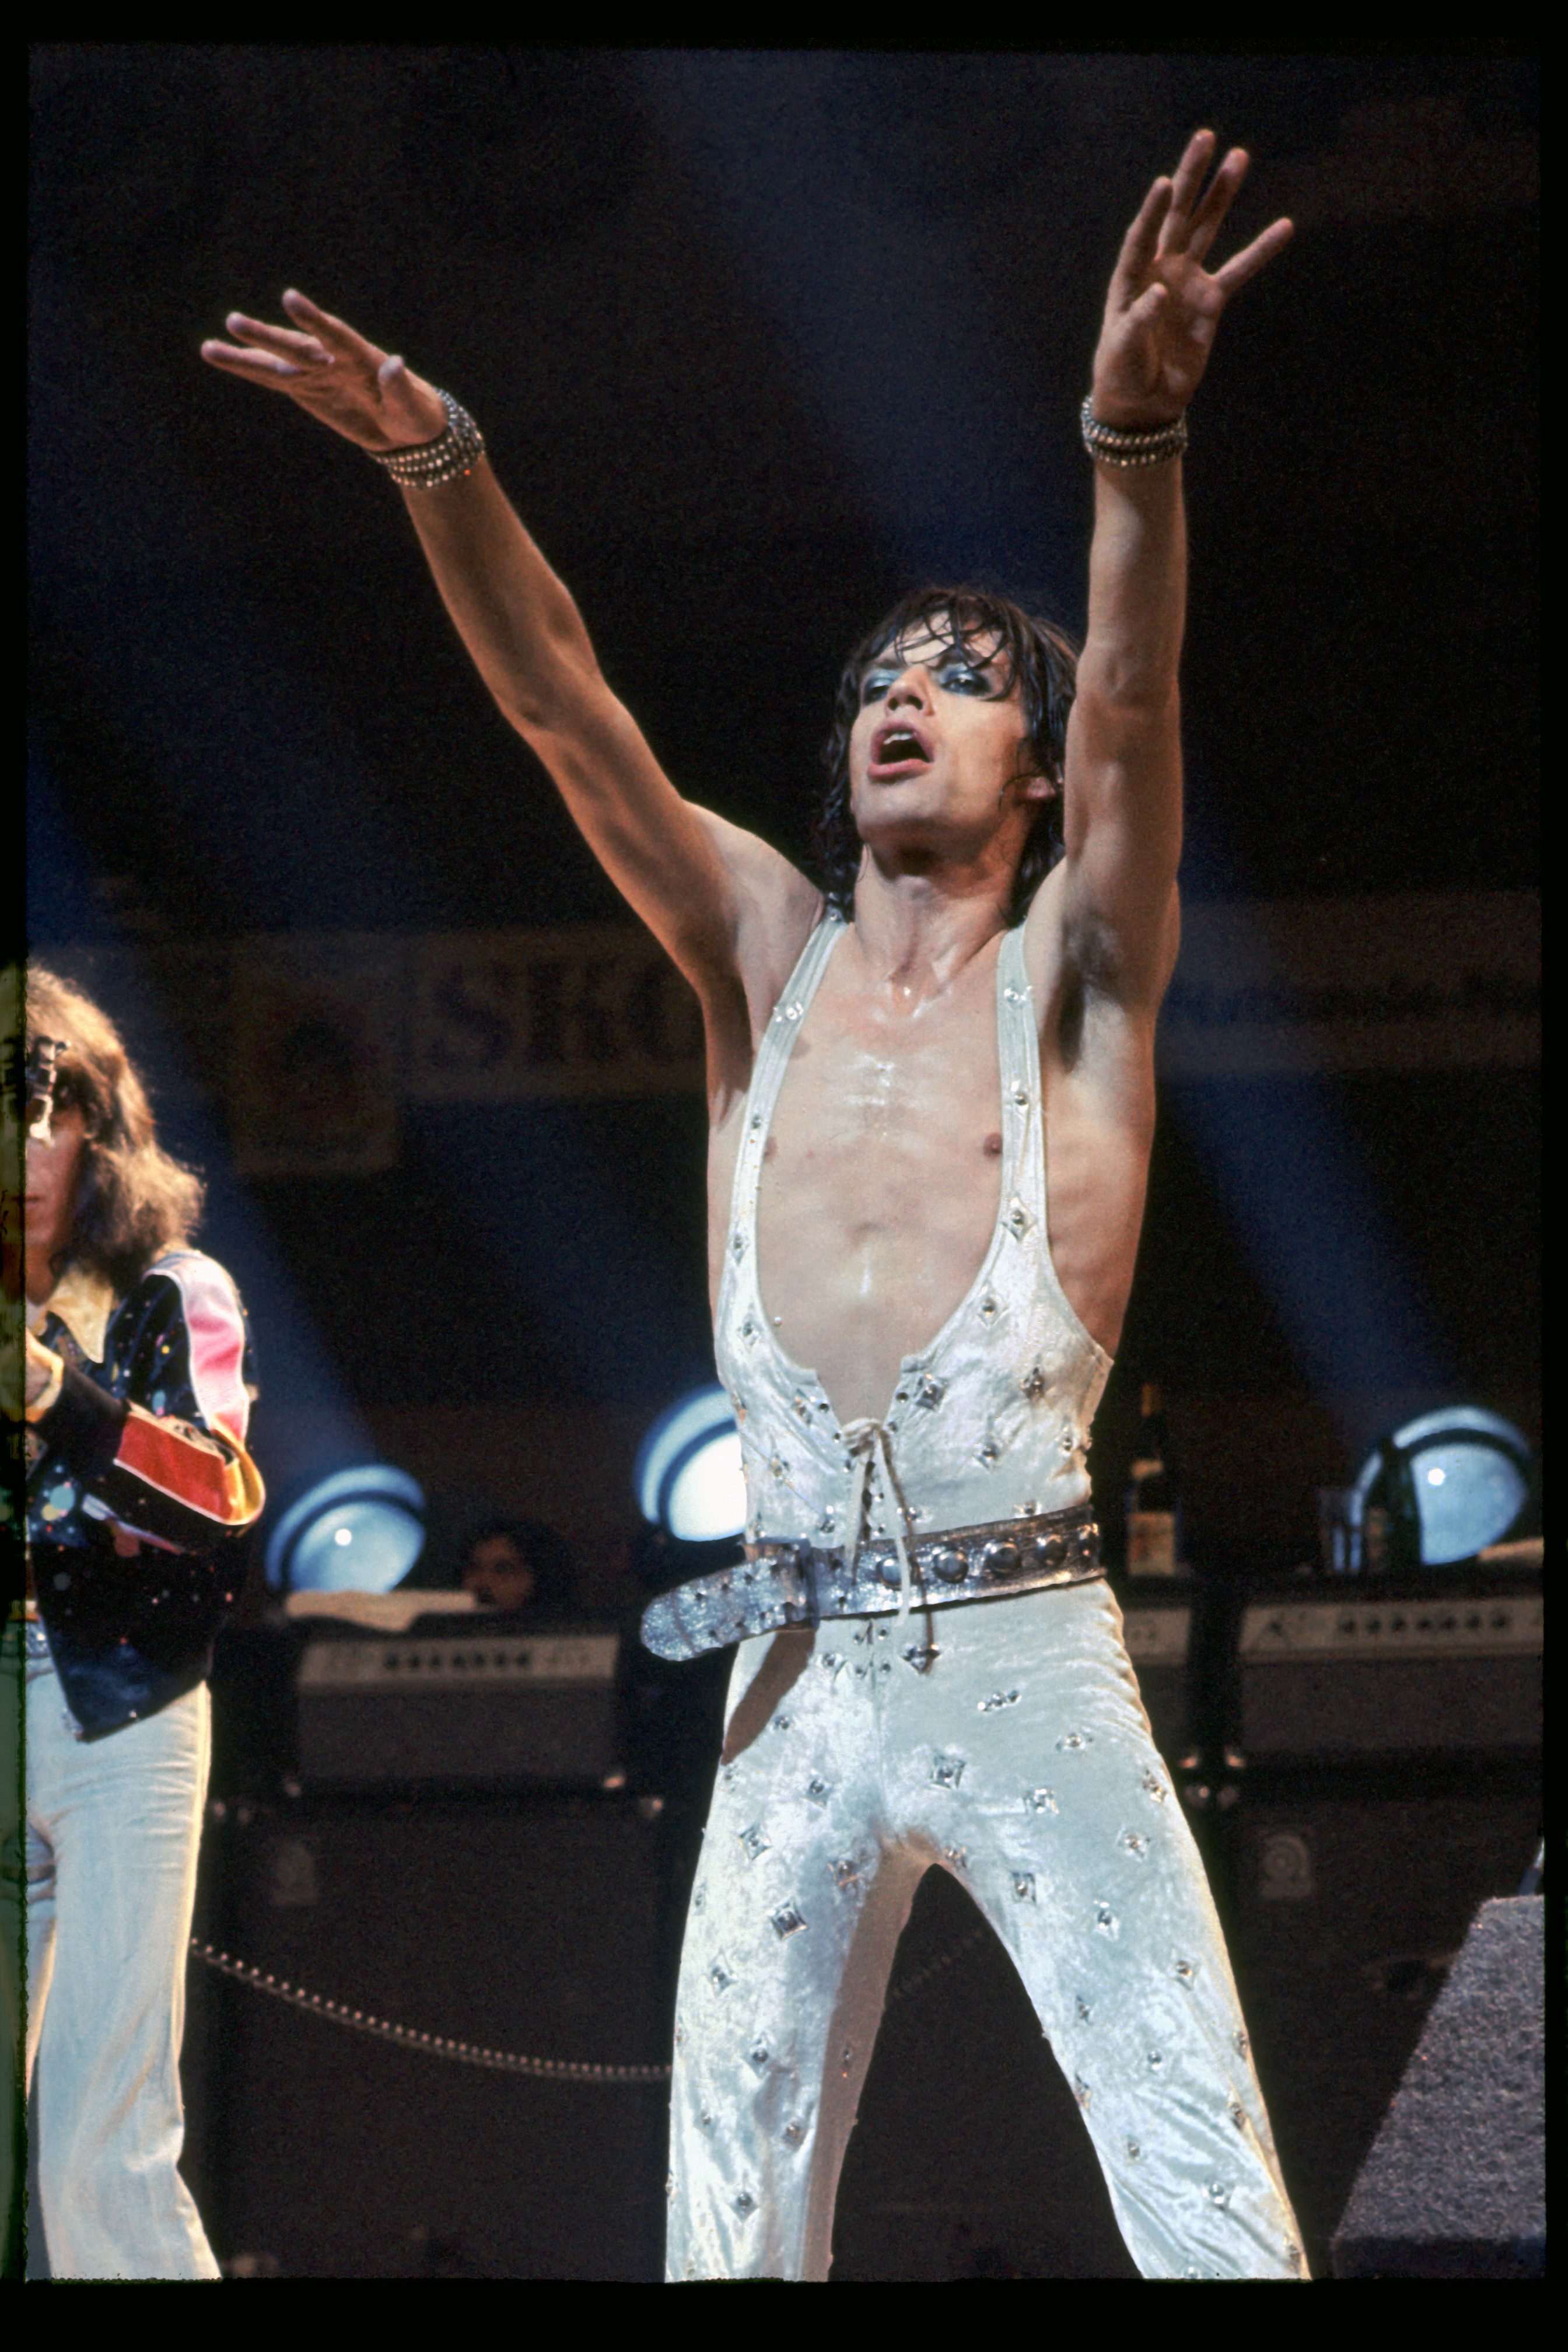 mick jagger performing in a jumpsuit and blue eyeshadow at a concert in 1973